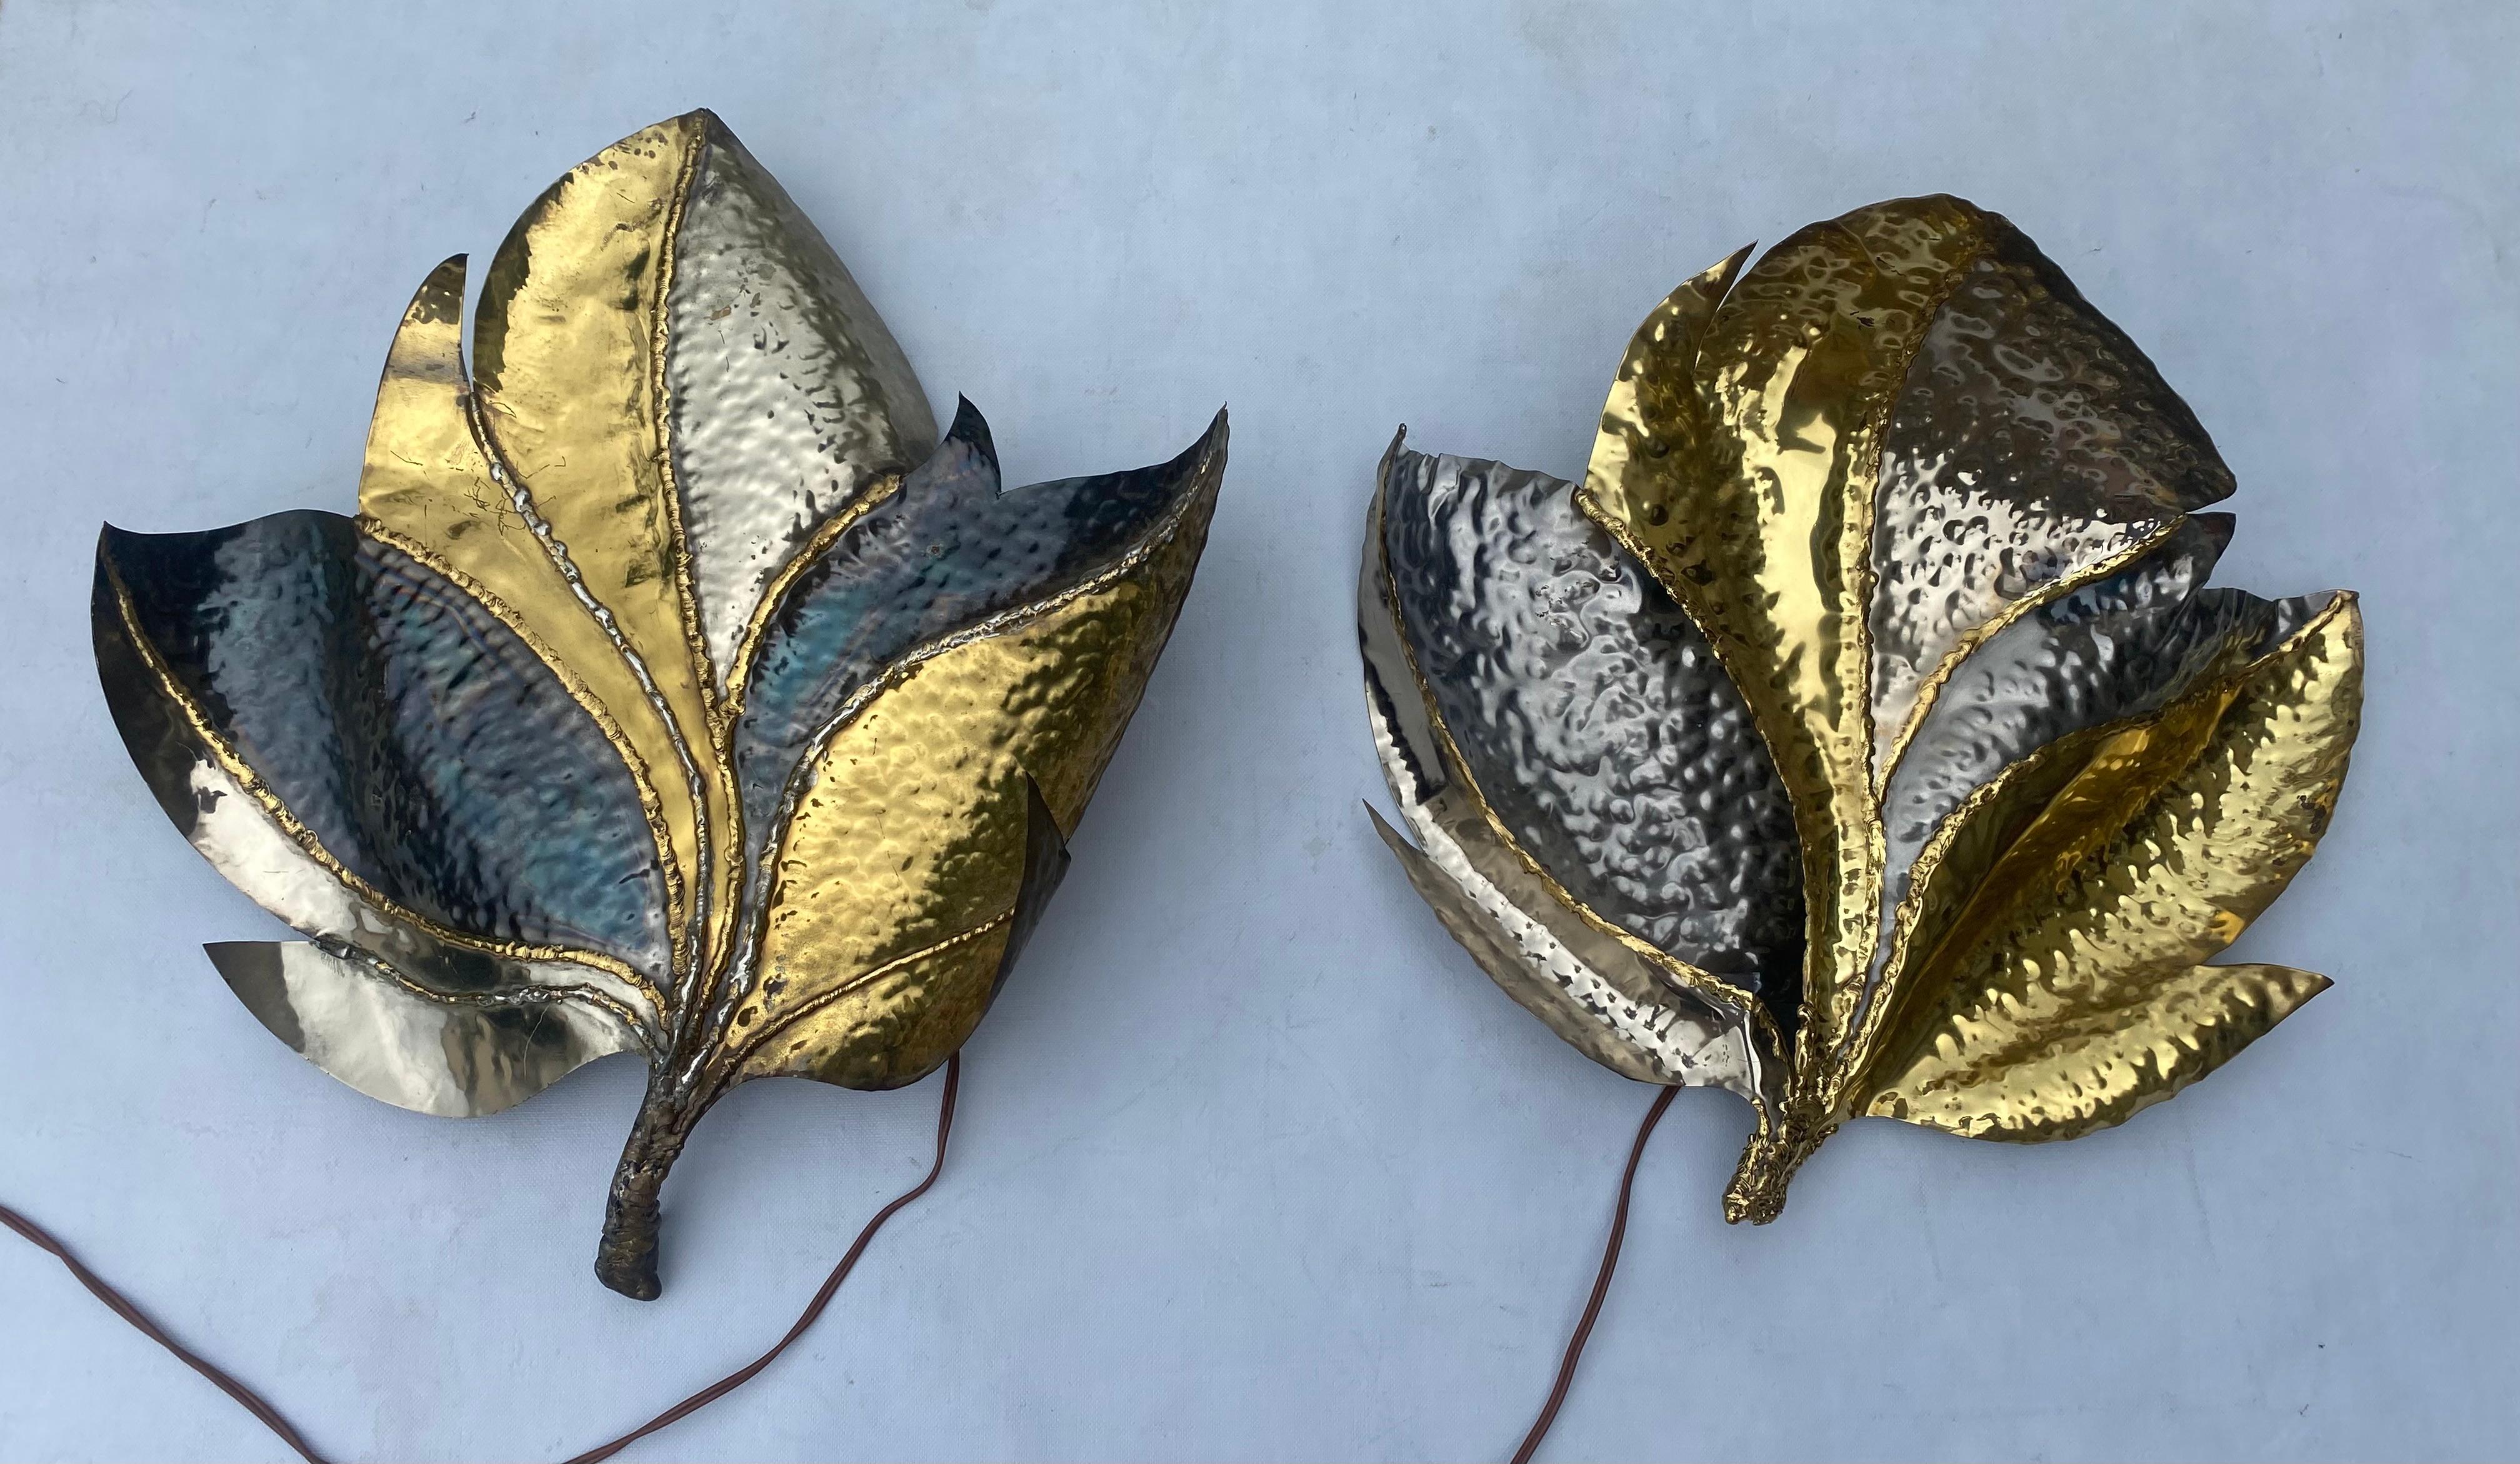 Pair of foliage wall lights in silvered and patinated brass, 2 bulbs.
Work by Fernandez or I. Faure or Duval Brasseur.
Height: 52 cm
Width: 52 cm
Depth: 12 cm
The slightly curved one
Height: 43 cm
Width: 52 cm
Depth: 23 cm